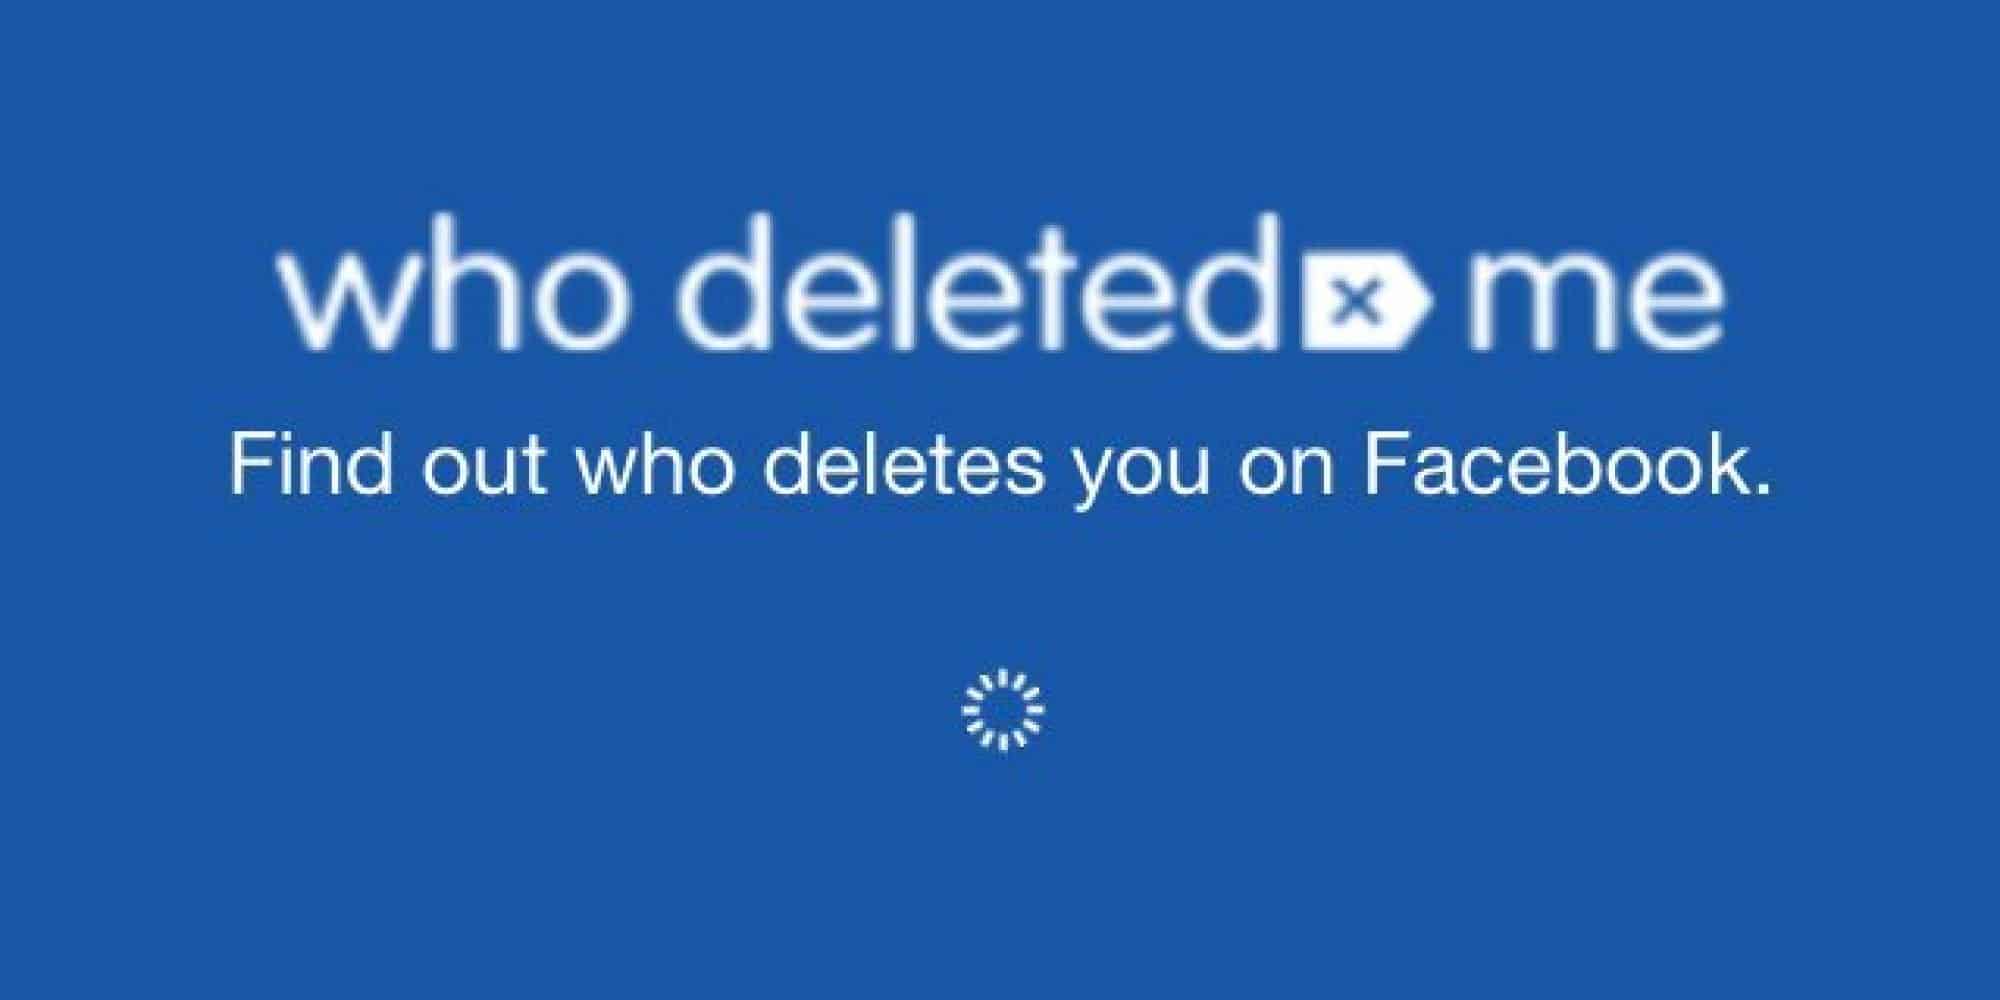 Who Deleted Me